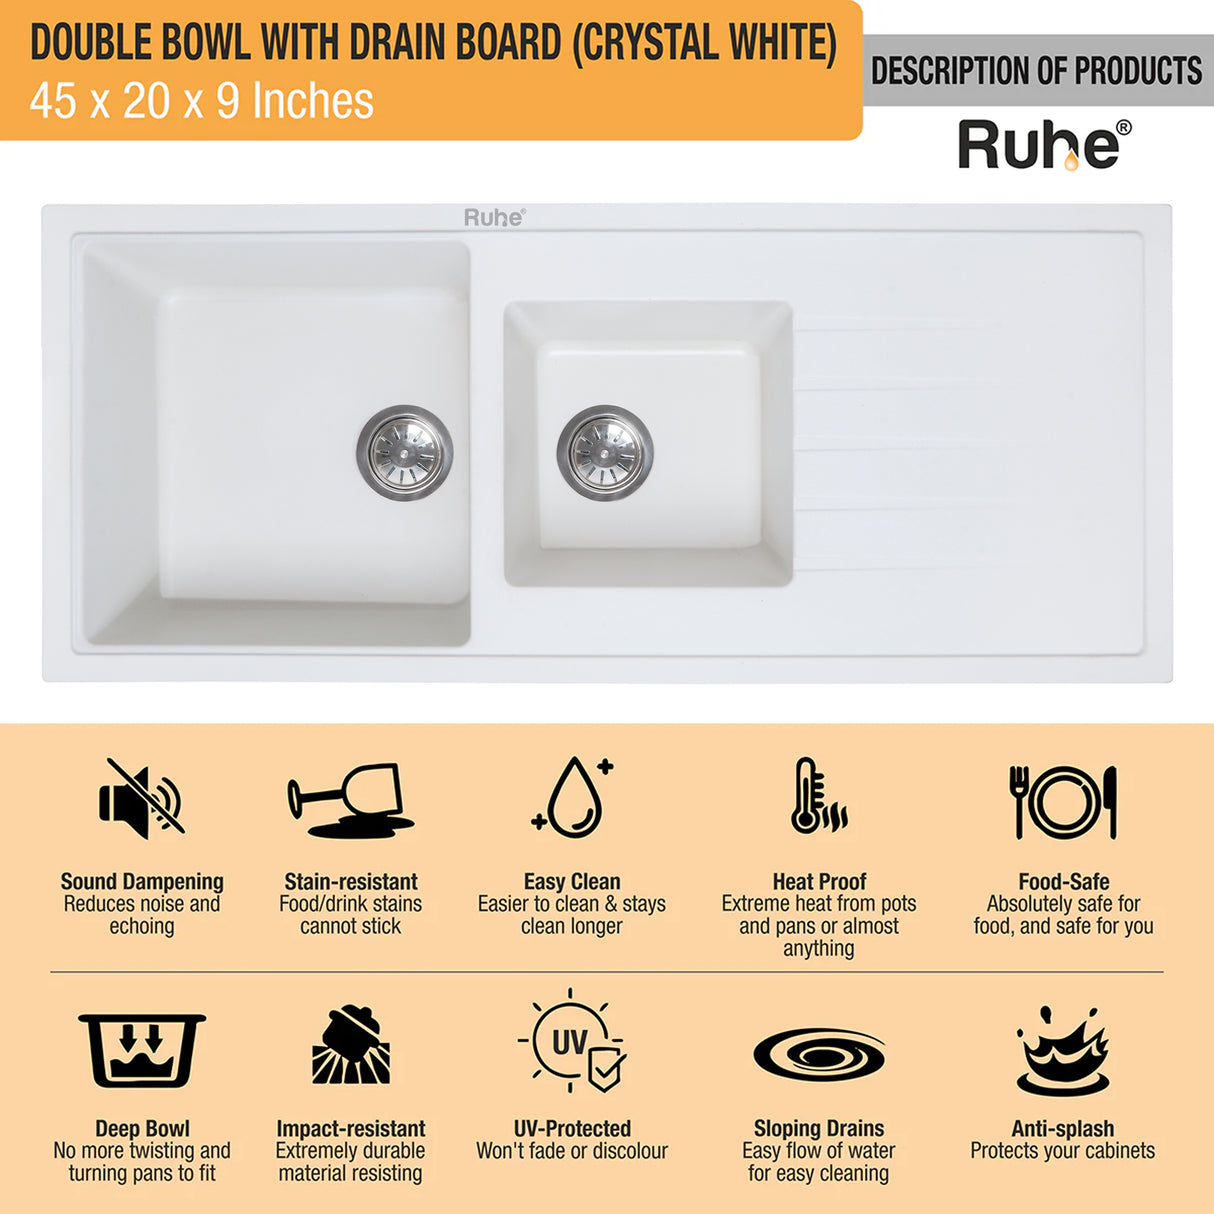 Quartz Double Bowl with Drainboard Kitchen Sink - Crystal White (45 x 20 x 9 inches) - by Ruhe®